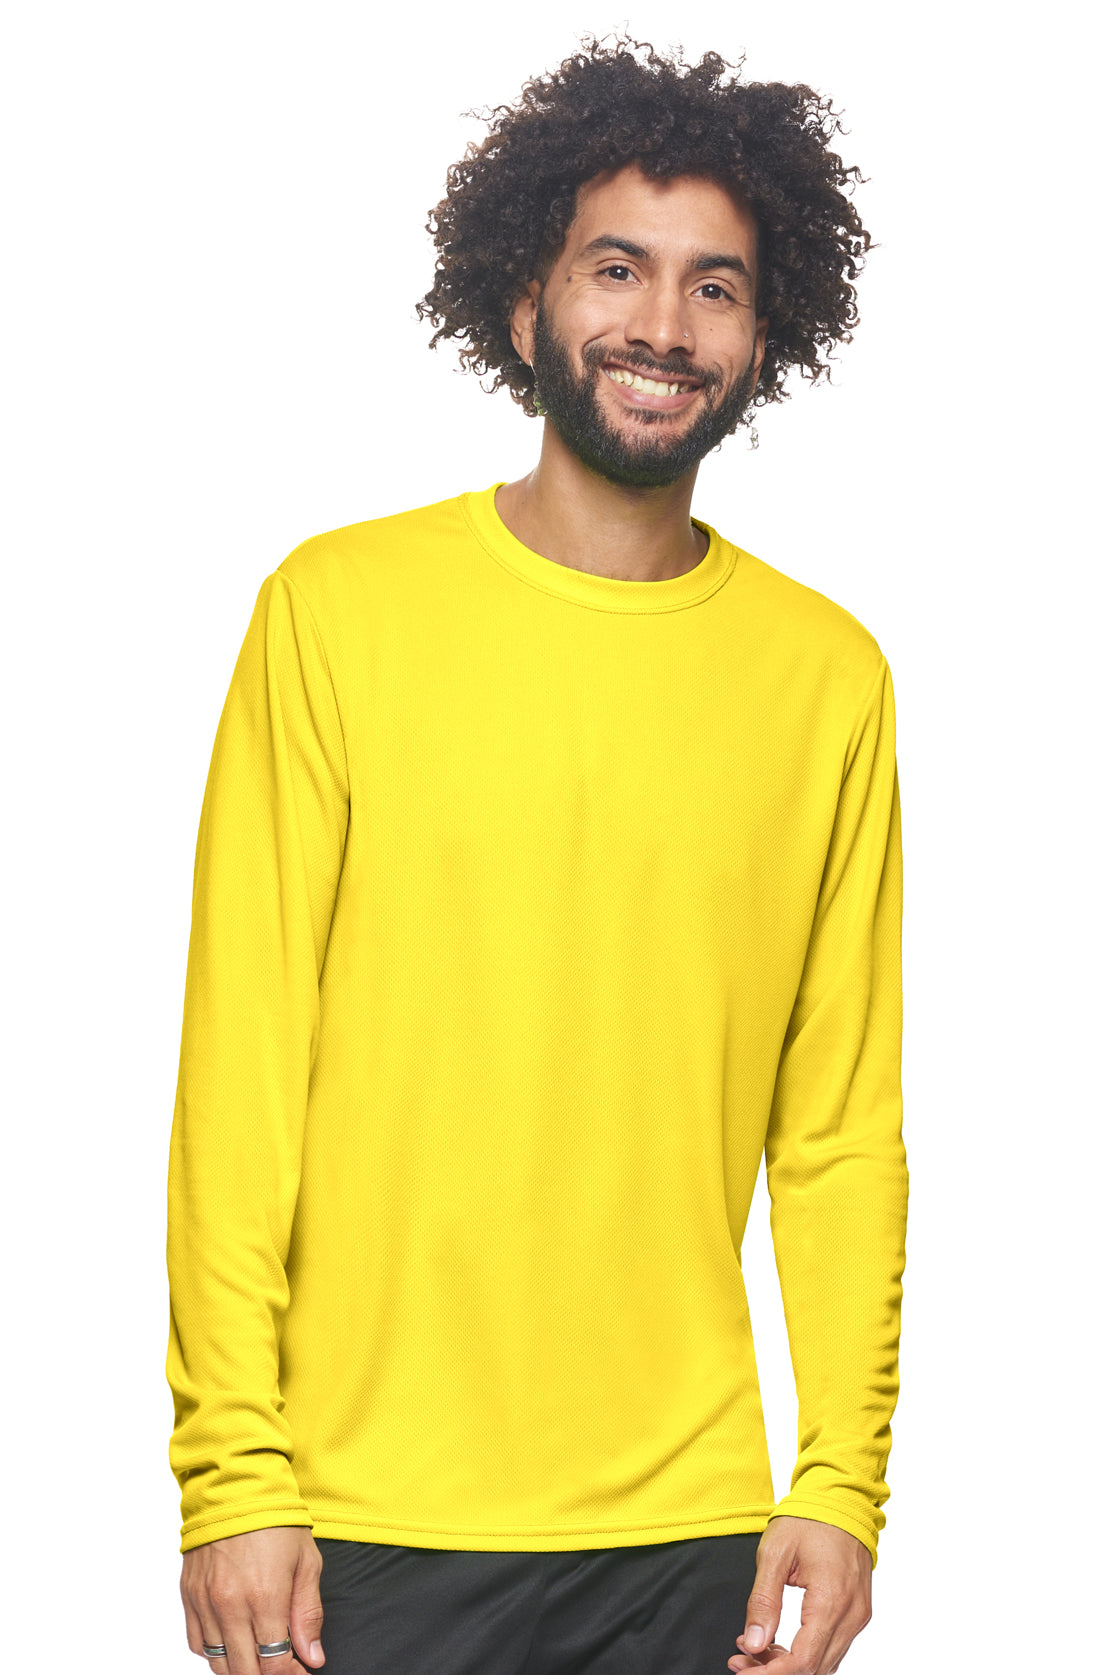 Expert Brand Wholesale Sportswear Activewear Made in USA Oxymesh™ Long Sleeve Tec Tee AJ901D bright yellow#bright-yellow